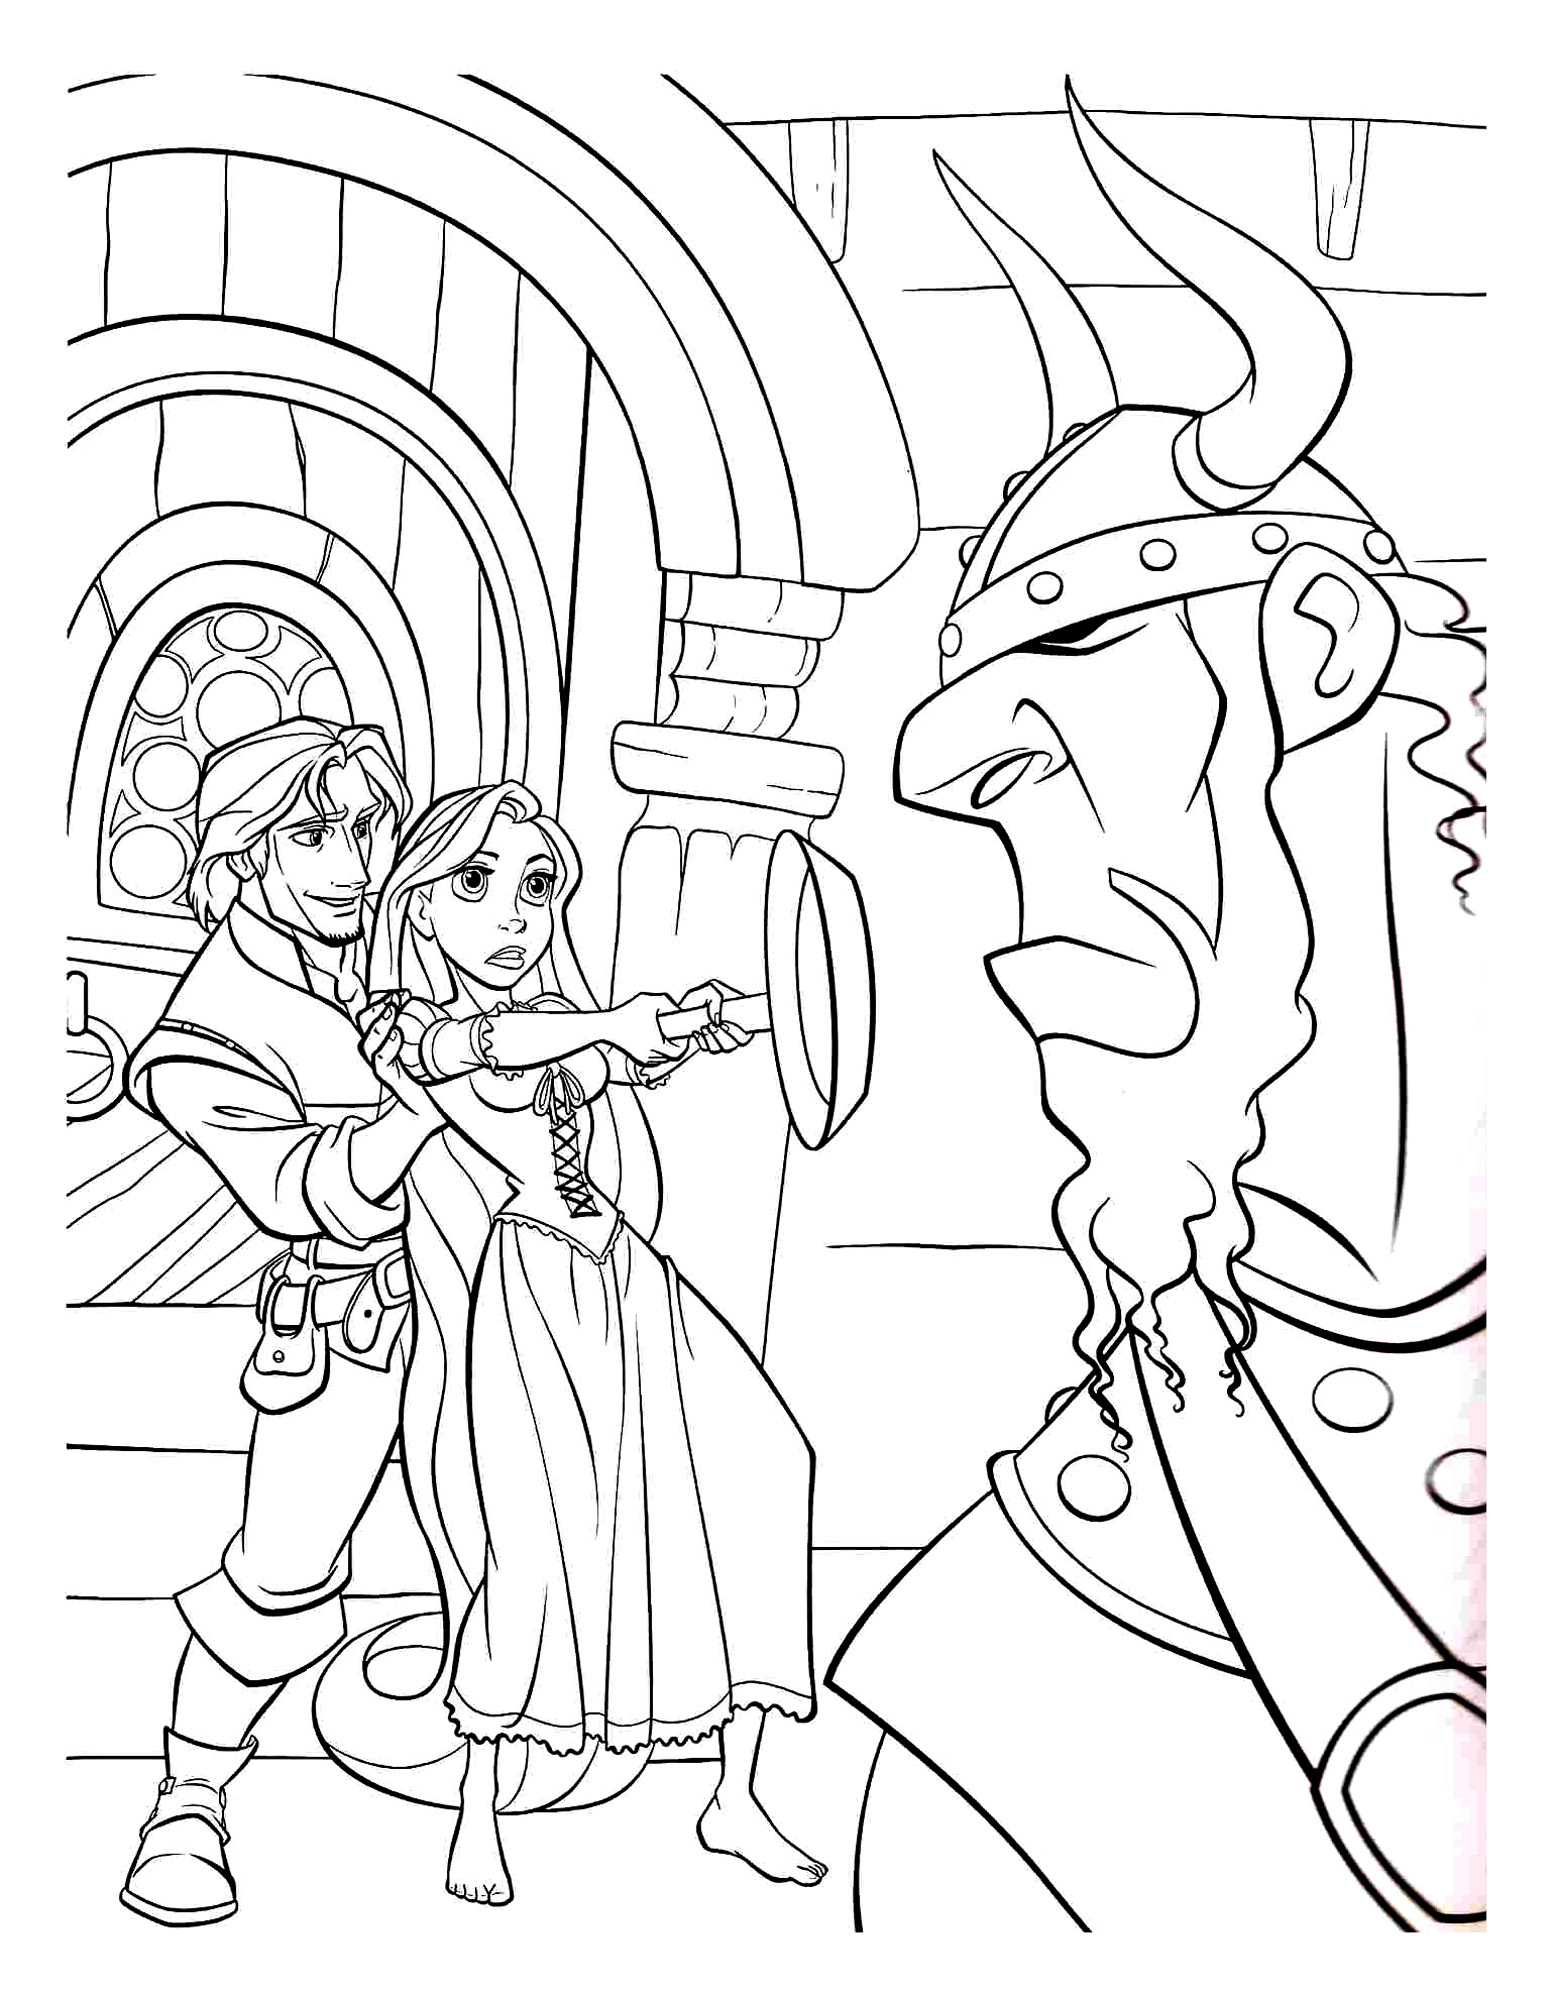 Rapunzel protects Flynn rider Coloring Pages